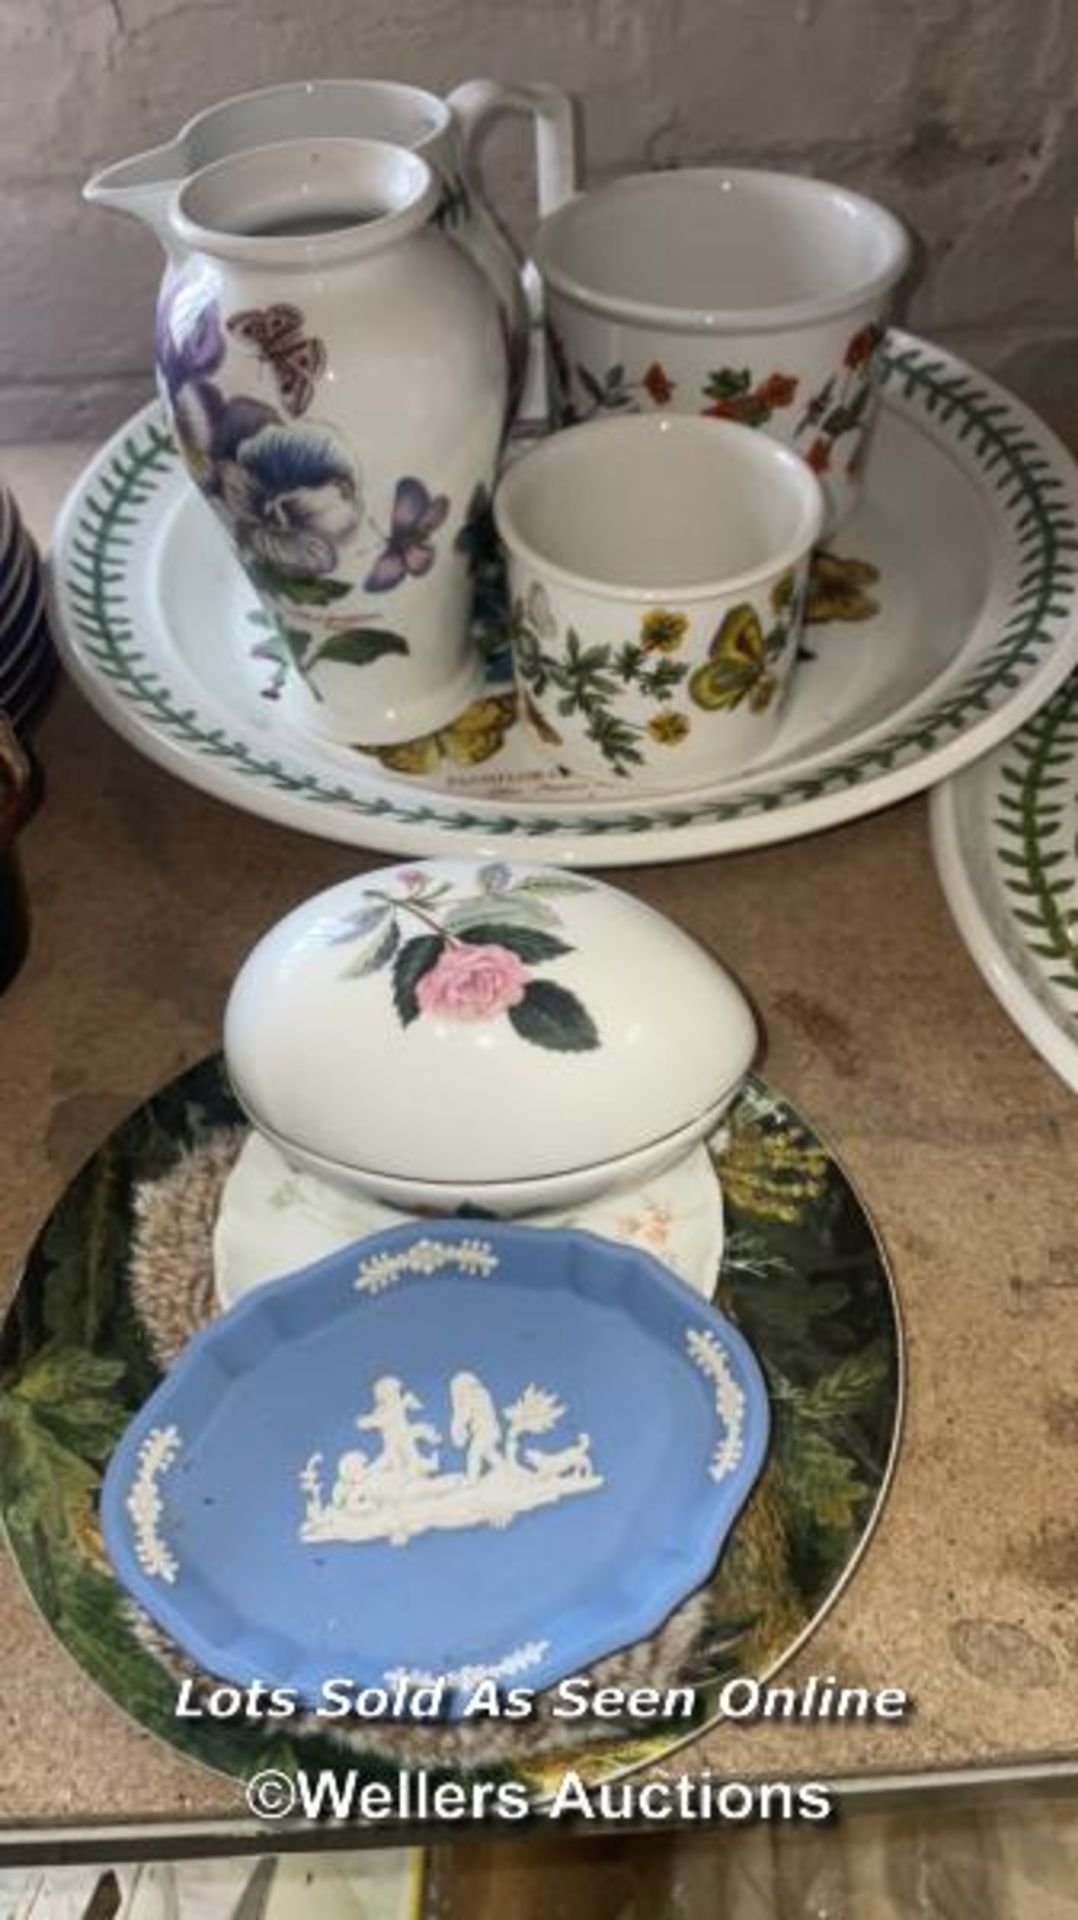 MINTON HADDON HALL, FOUR CUPS, SAUCERS AND TEA PLATES, OVAL DISH, PIN DISH; ROMANOV PORCELAIN 7 CUPS - Image 6 of 9